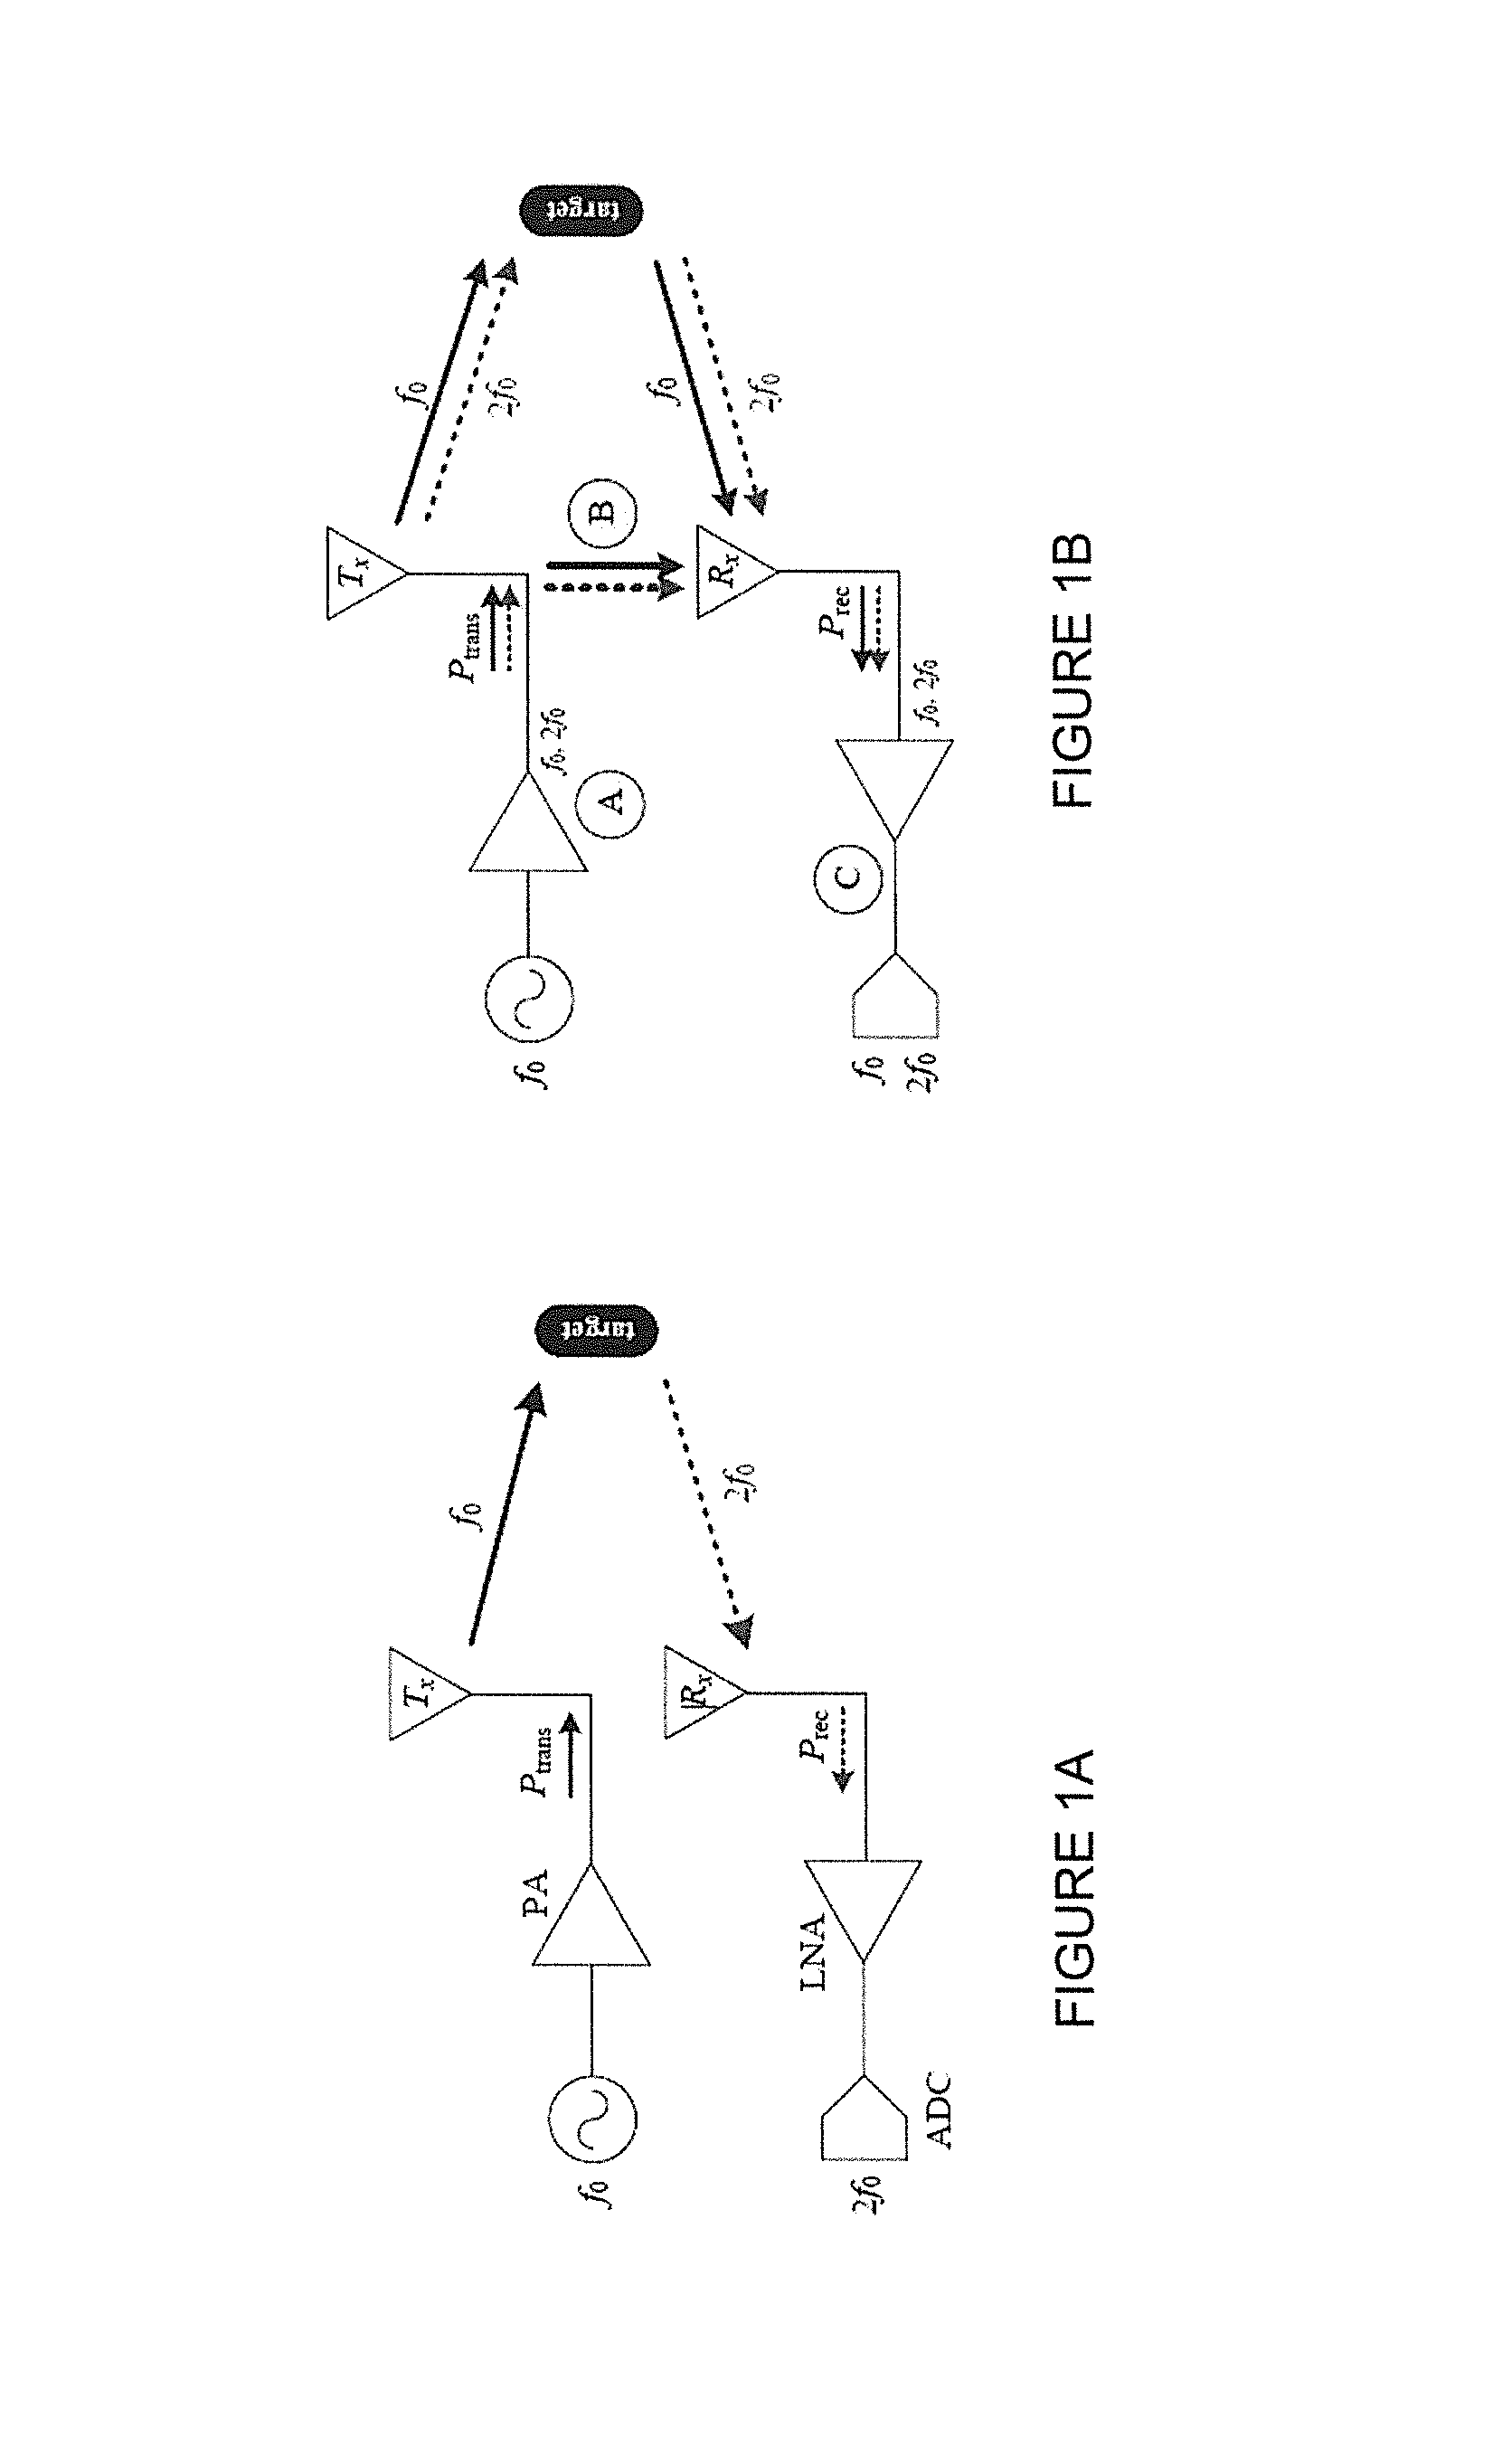 Automated cancellation of harmonics using feed forward filter reflection for radar transmitter linearization